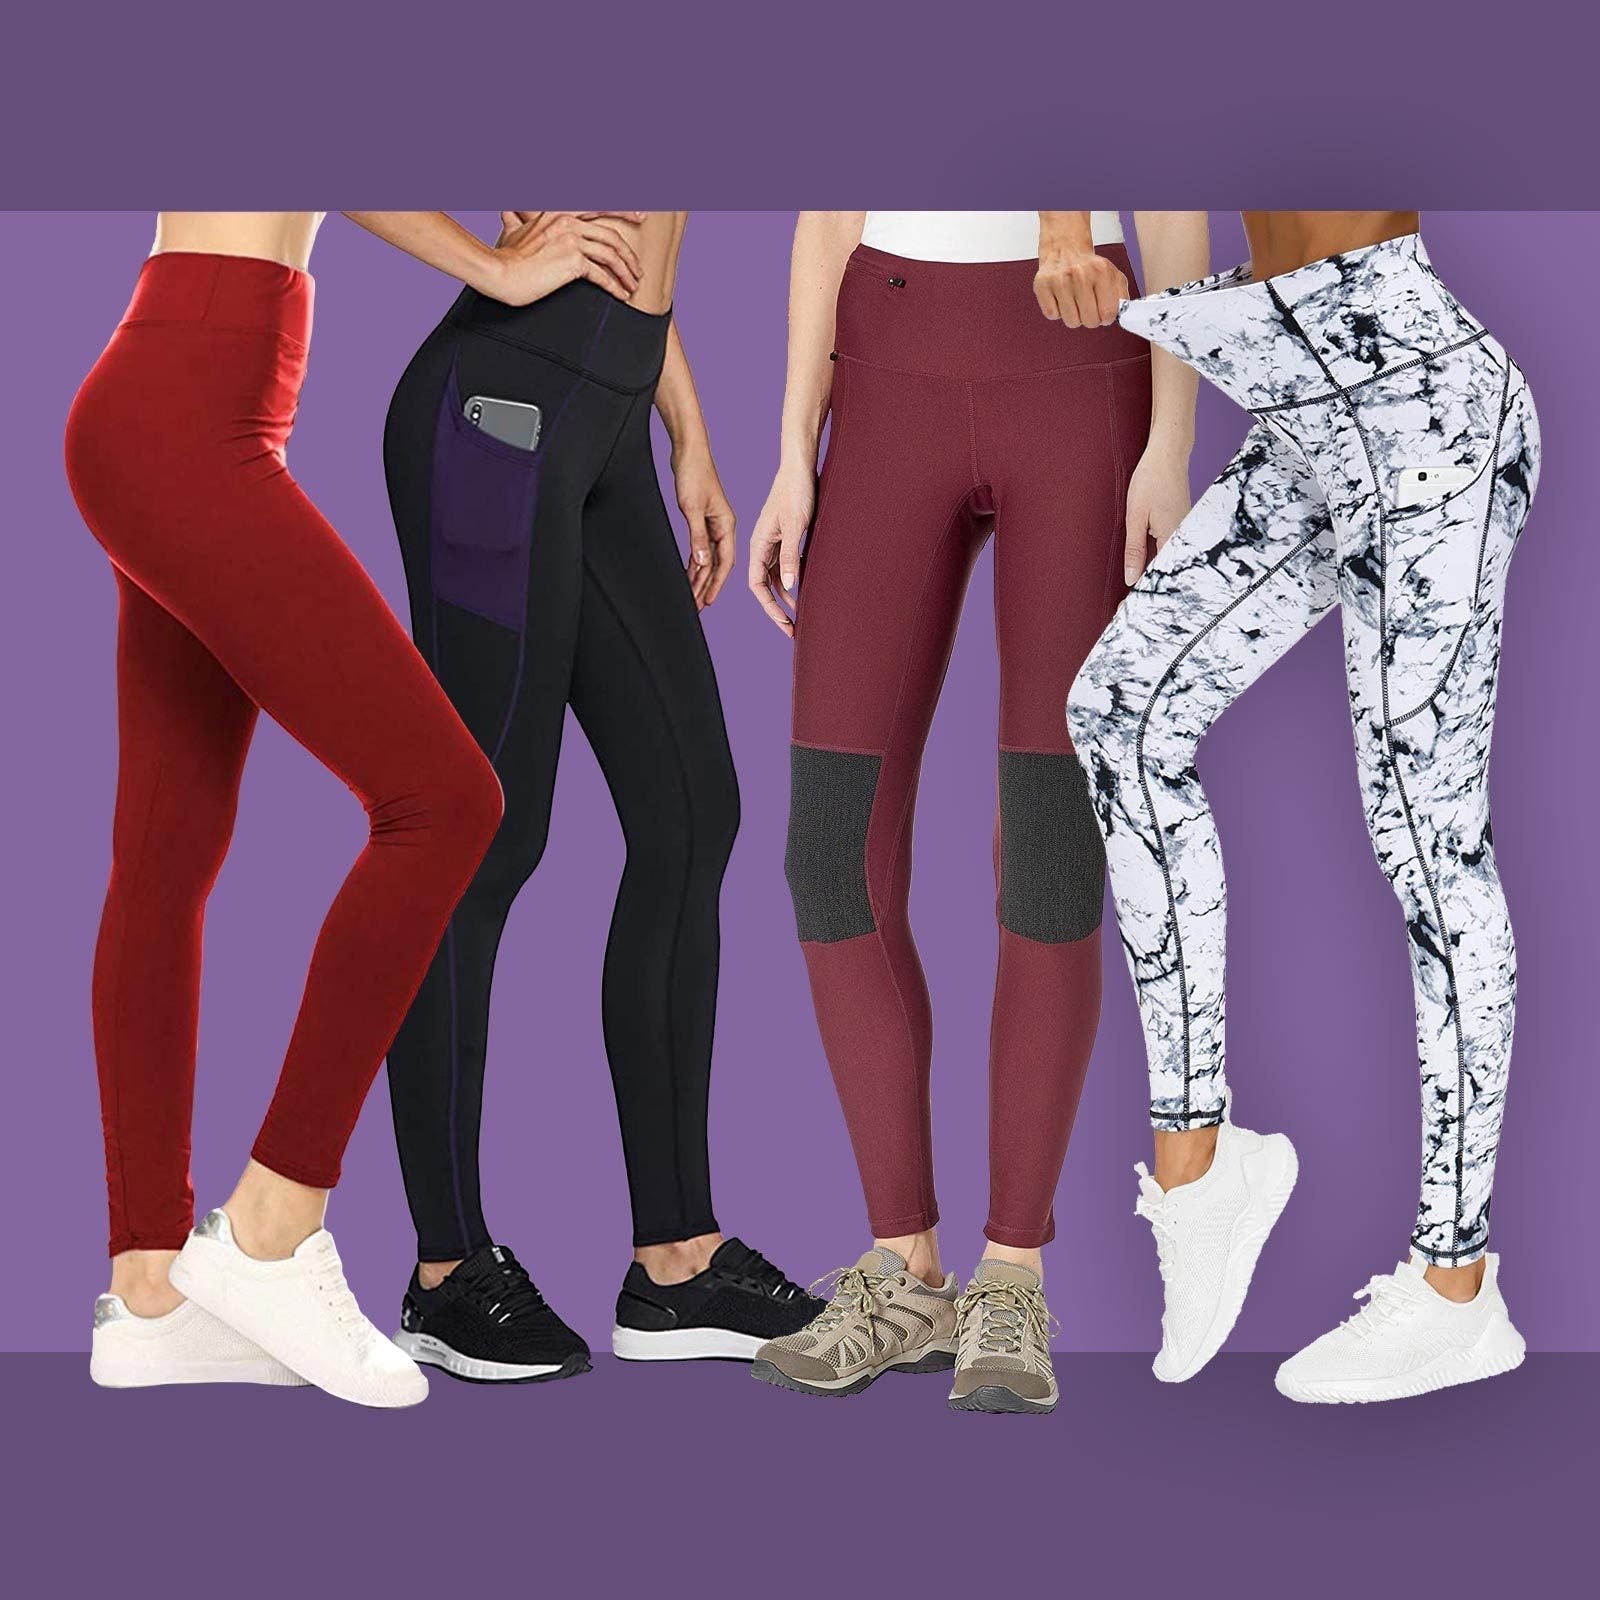 Types of Leggings Fabric Materials and How to Choose